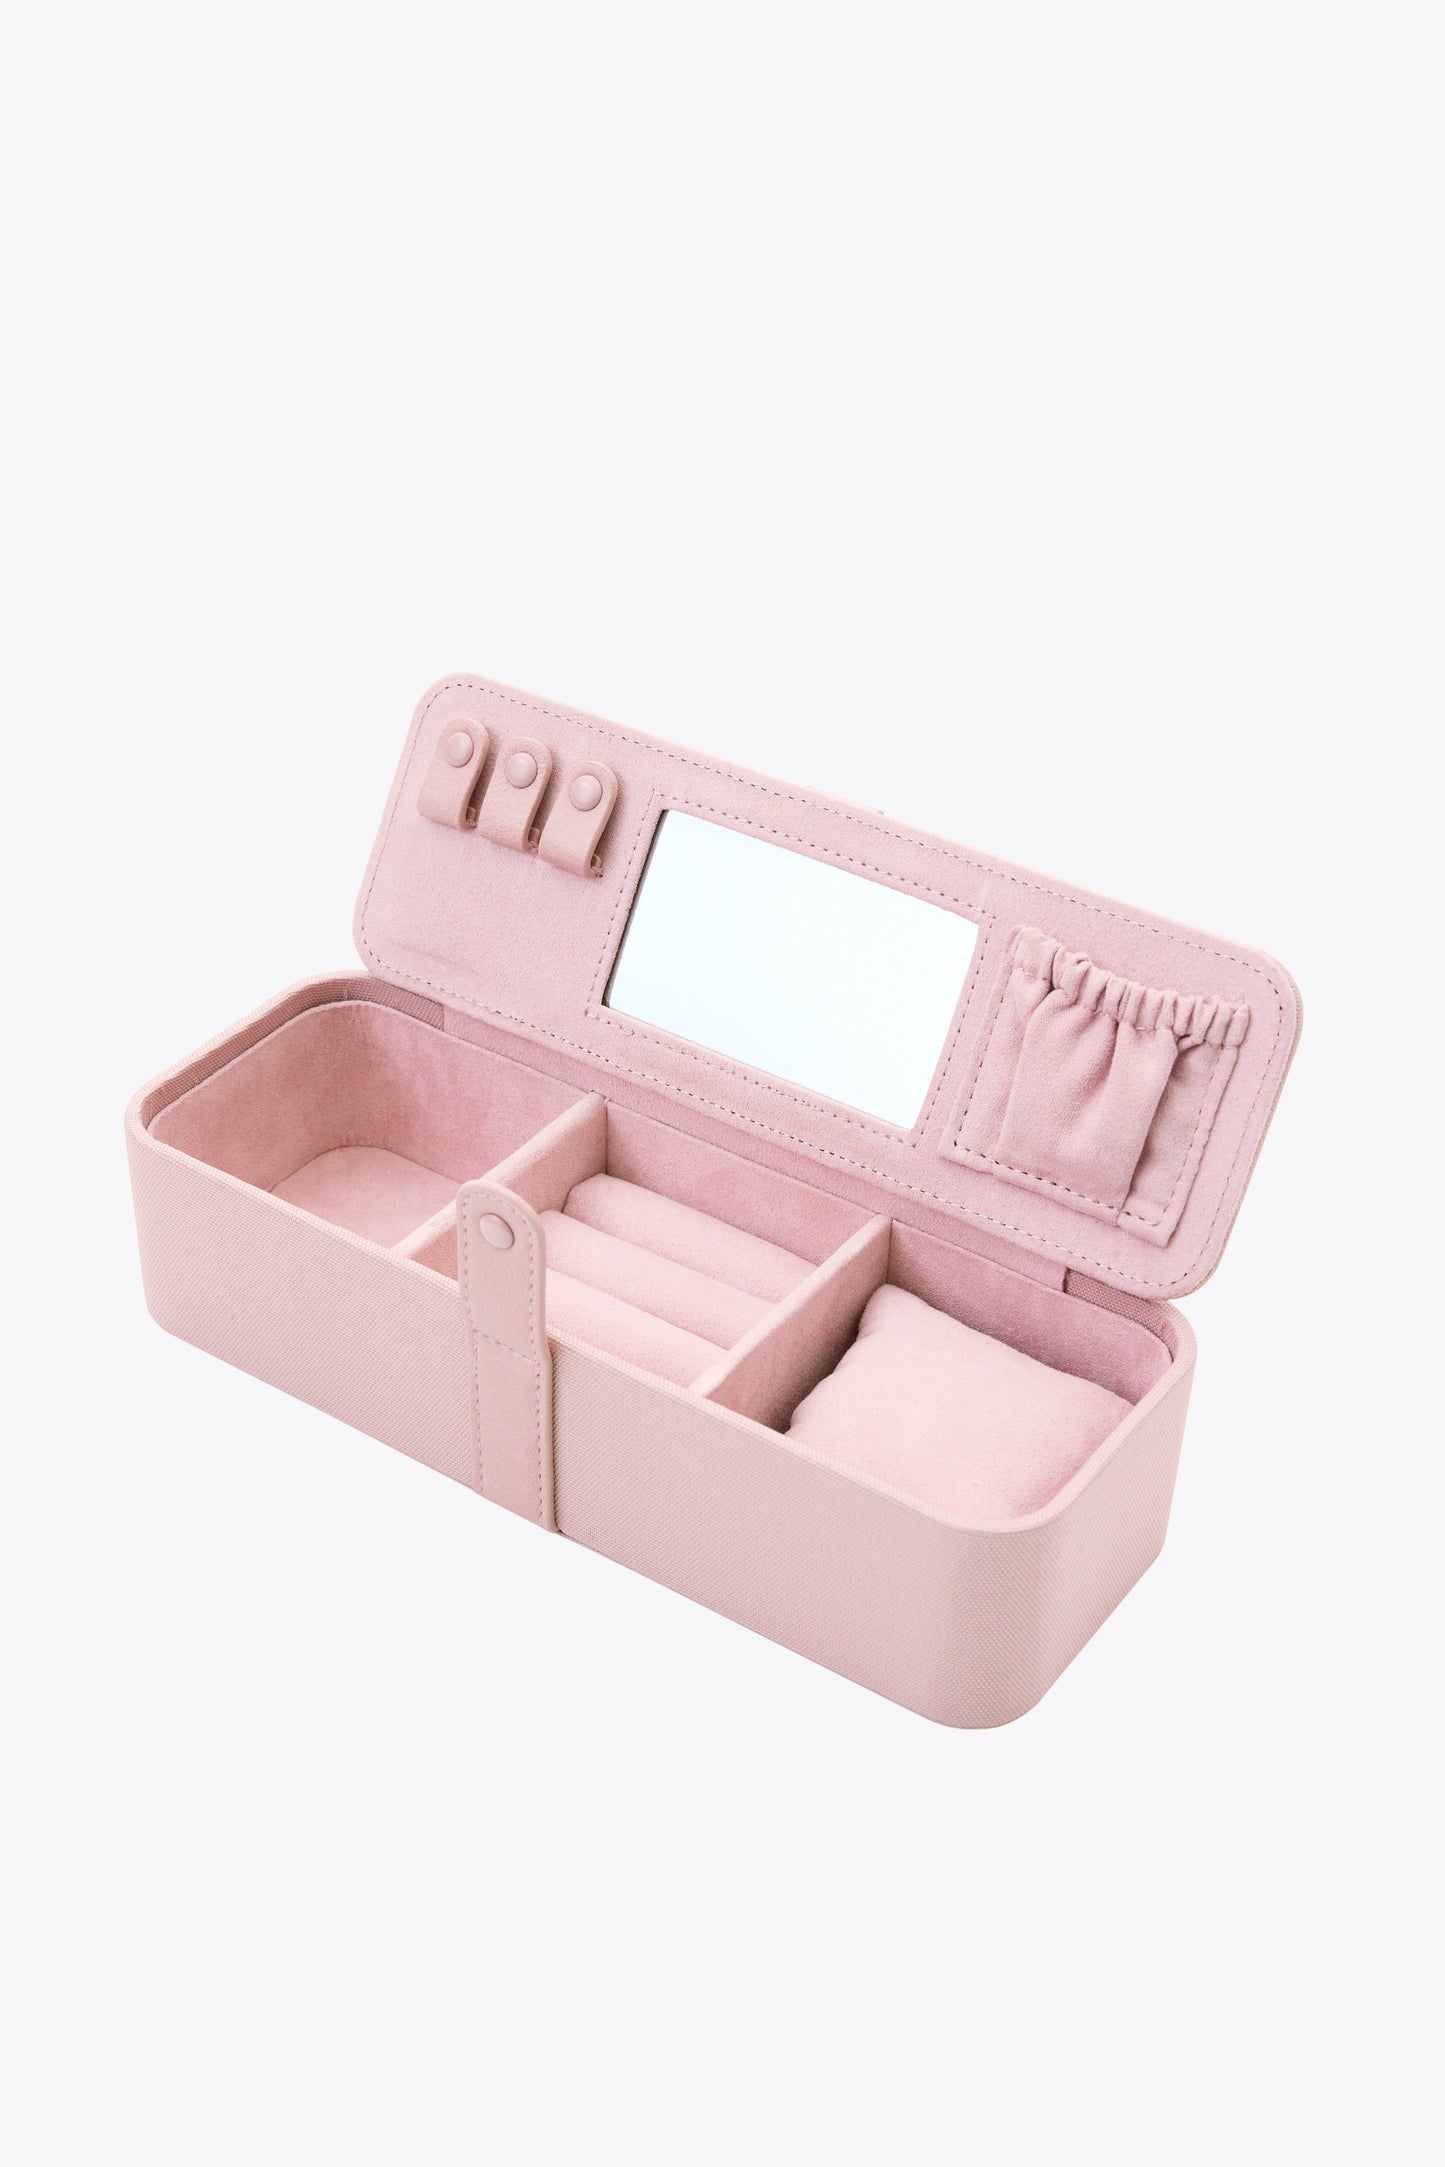 The Jewelry Case in Atlas Pink